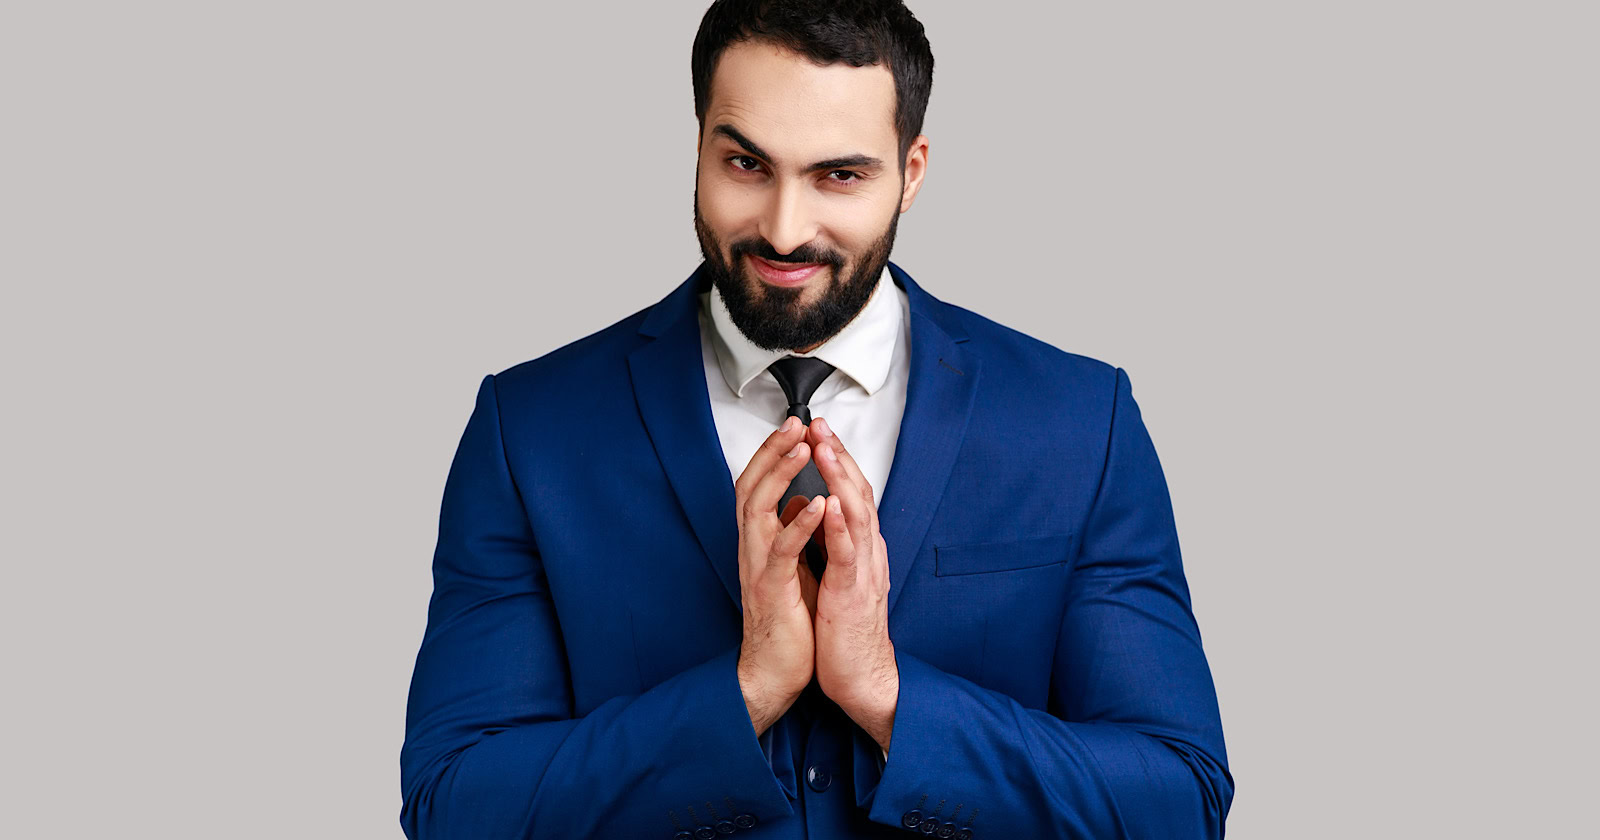 Cunning bearded man clasping hands and planning evil tricky prank or scheming, cheating with sly smile, wearing official style suit. Indoor studio shot isolated on gray background.